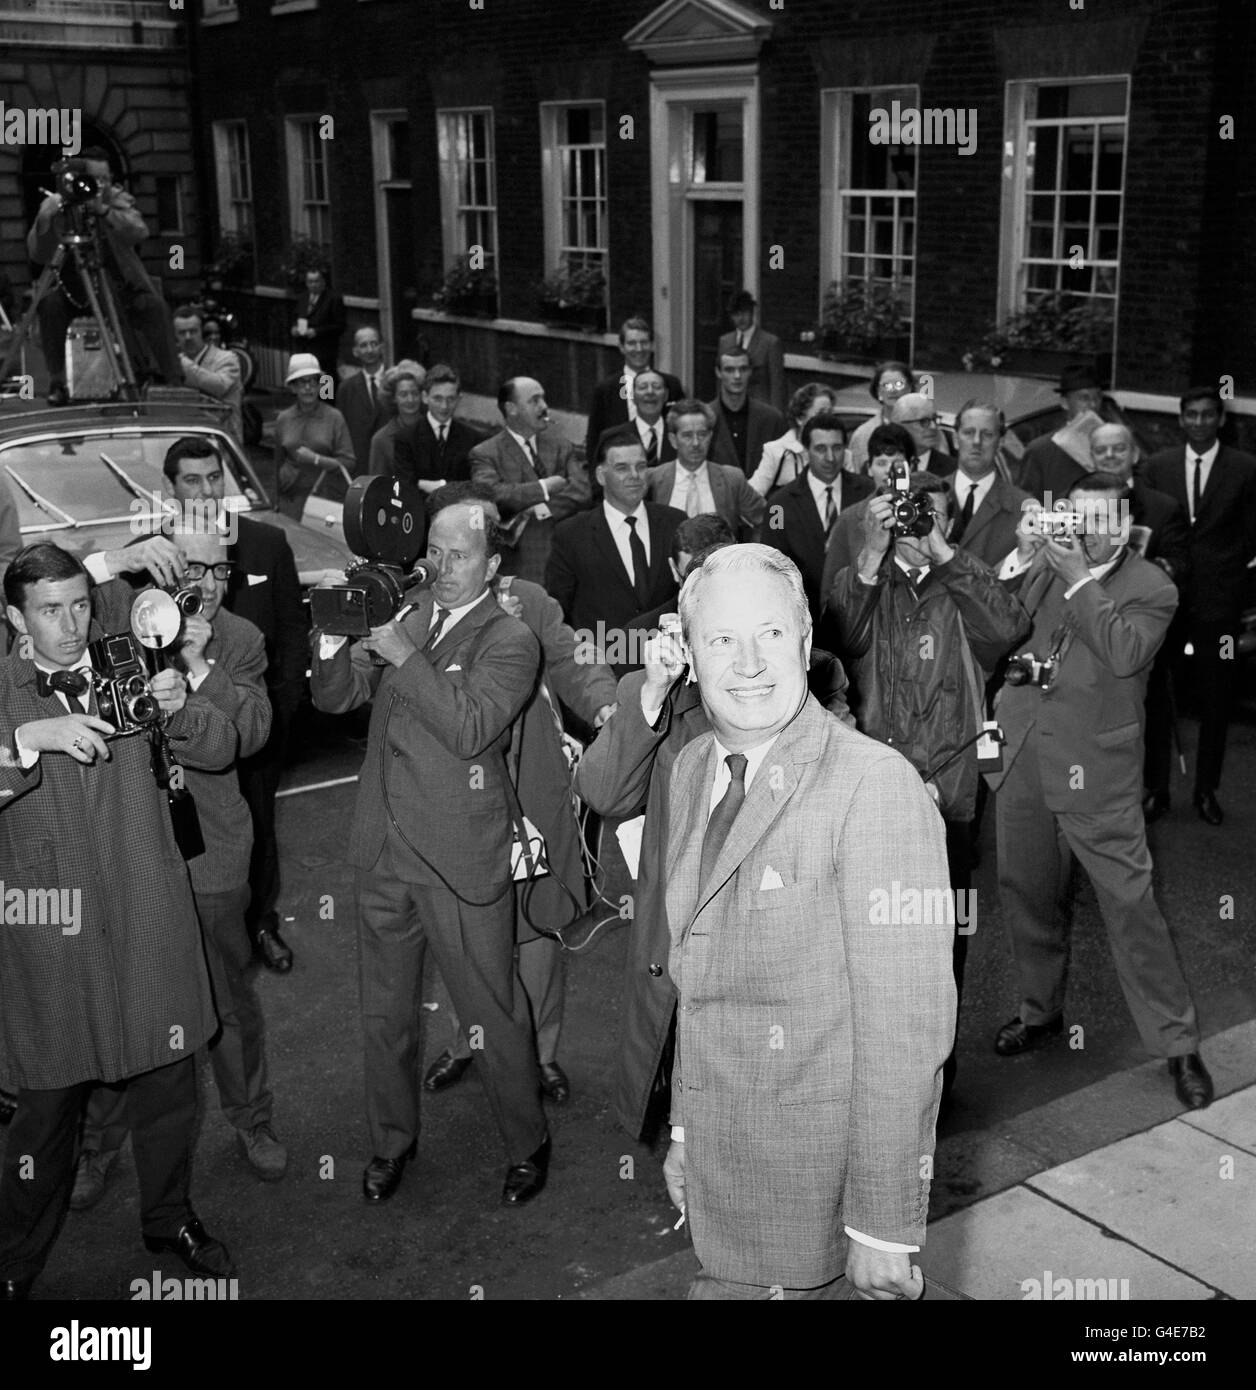 PA NEWS PHOTO 28/7/65 EDWARD HEATH LEAVING HIS FLAT IN ALBANY, Piccadilly, LONDON Stock Photo